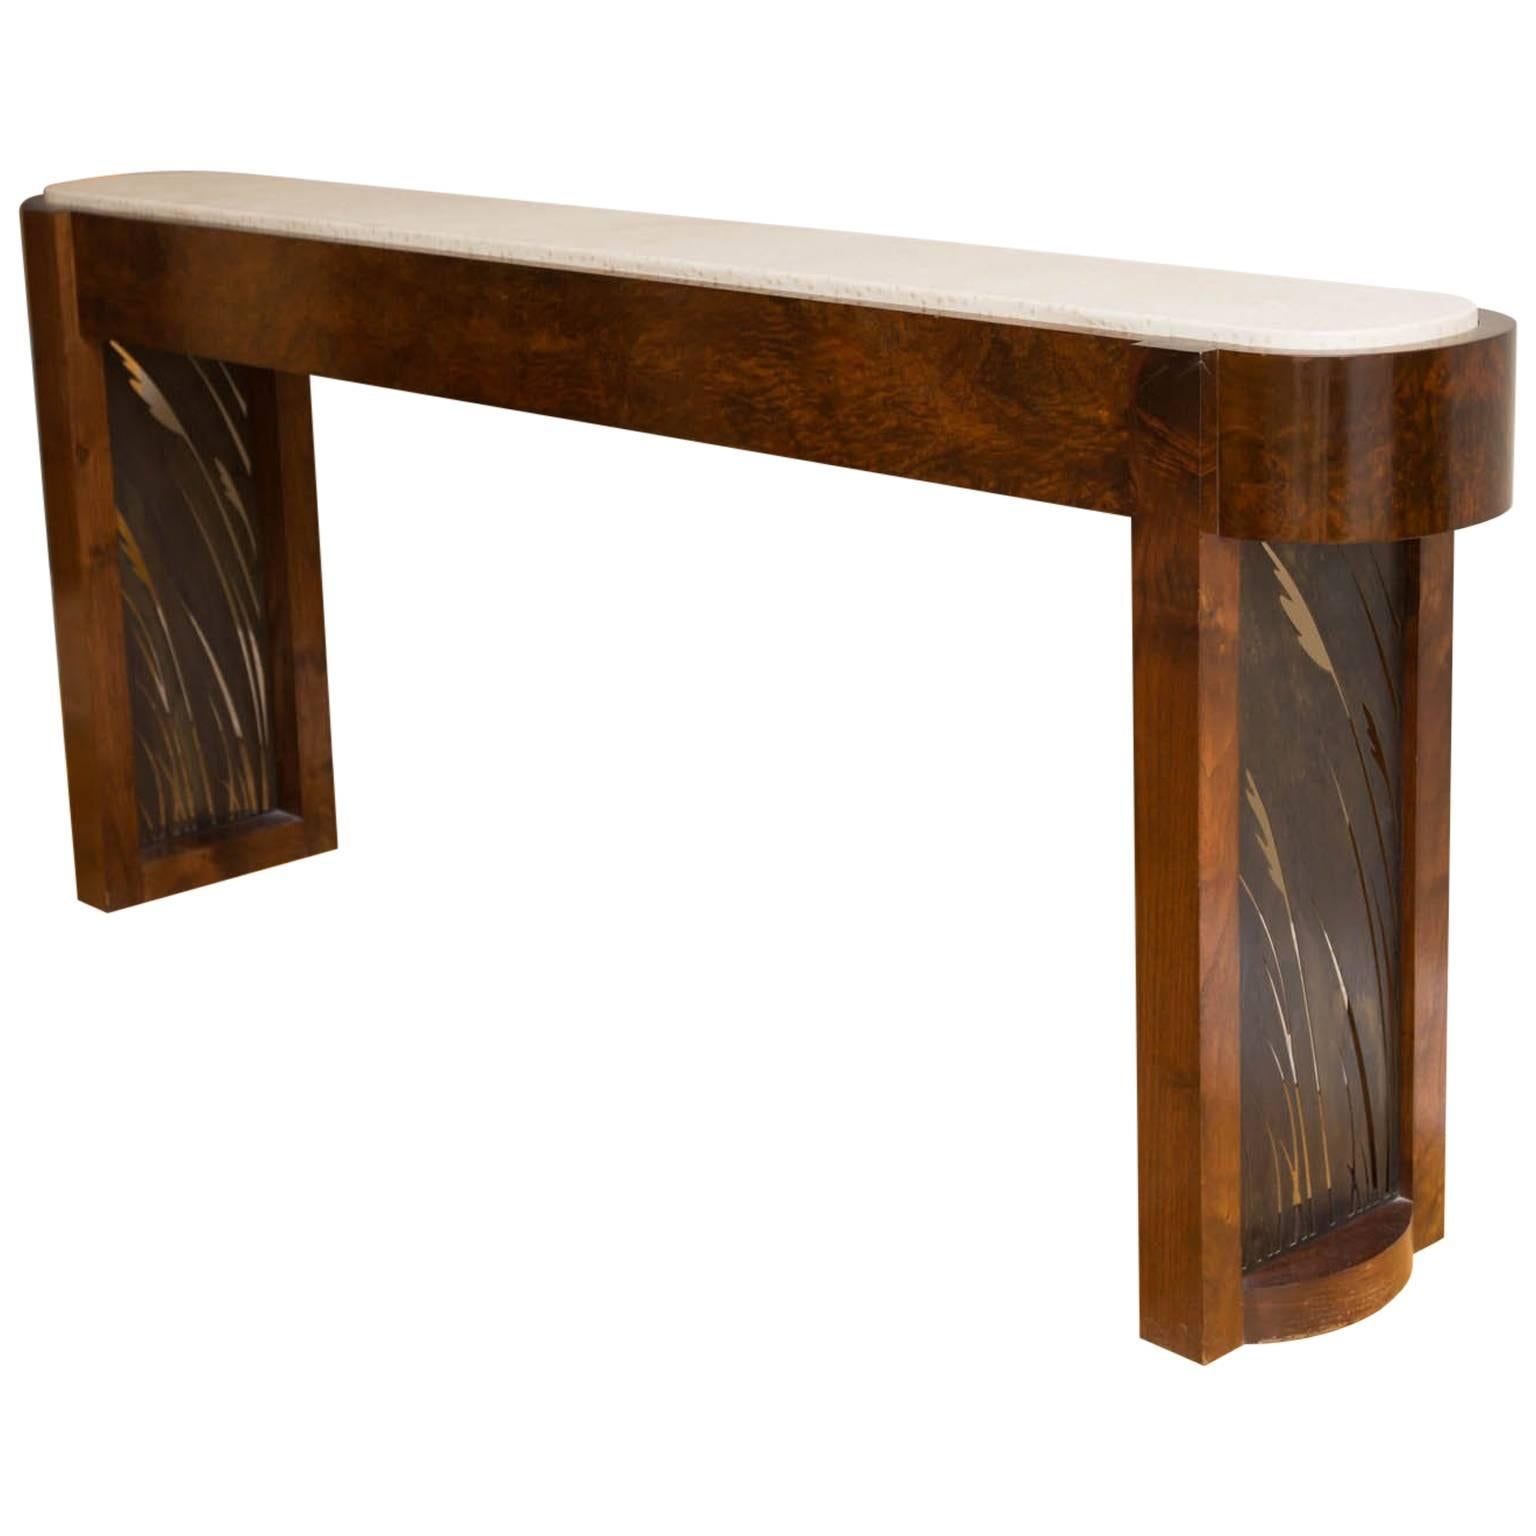 Burl Walnut, Leather and Patinated Steel Console Table by Gregory Clark For Sale